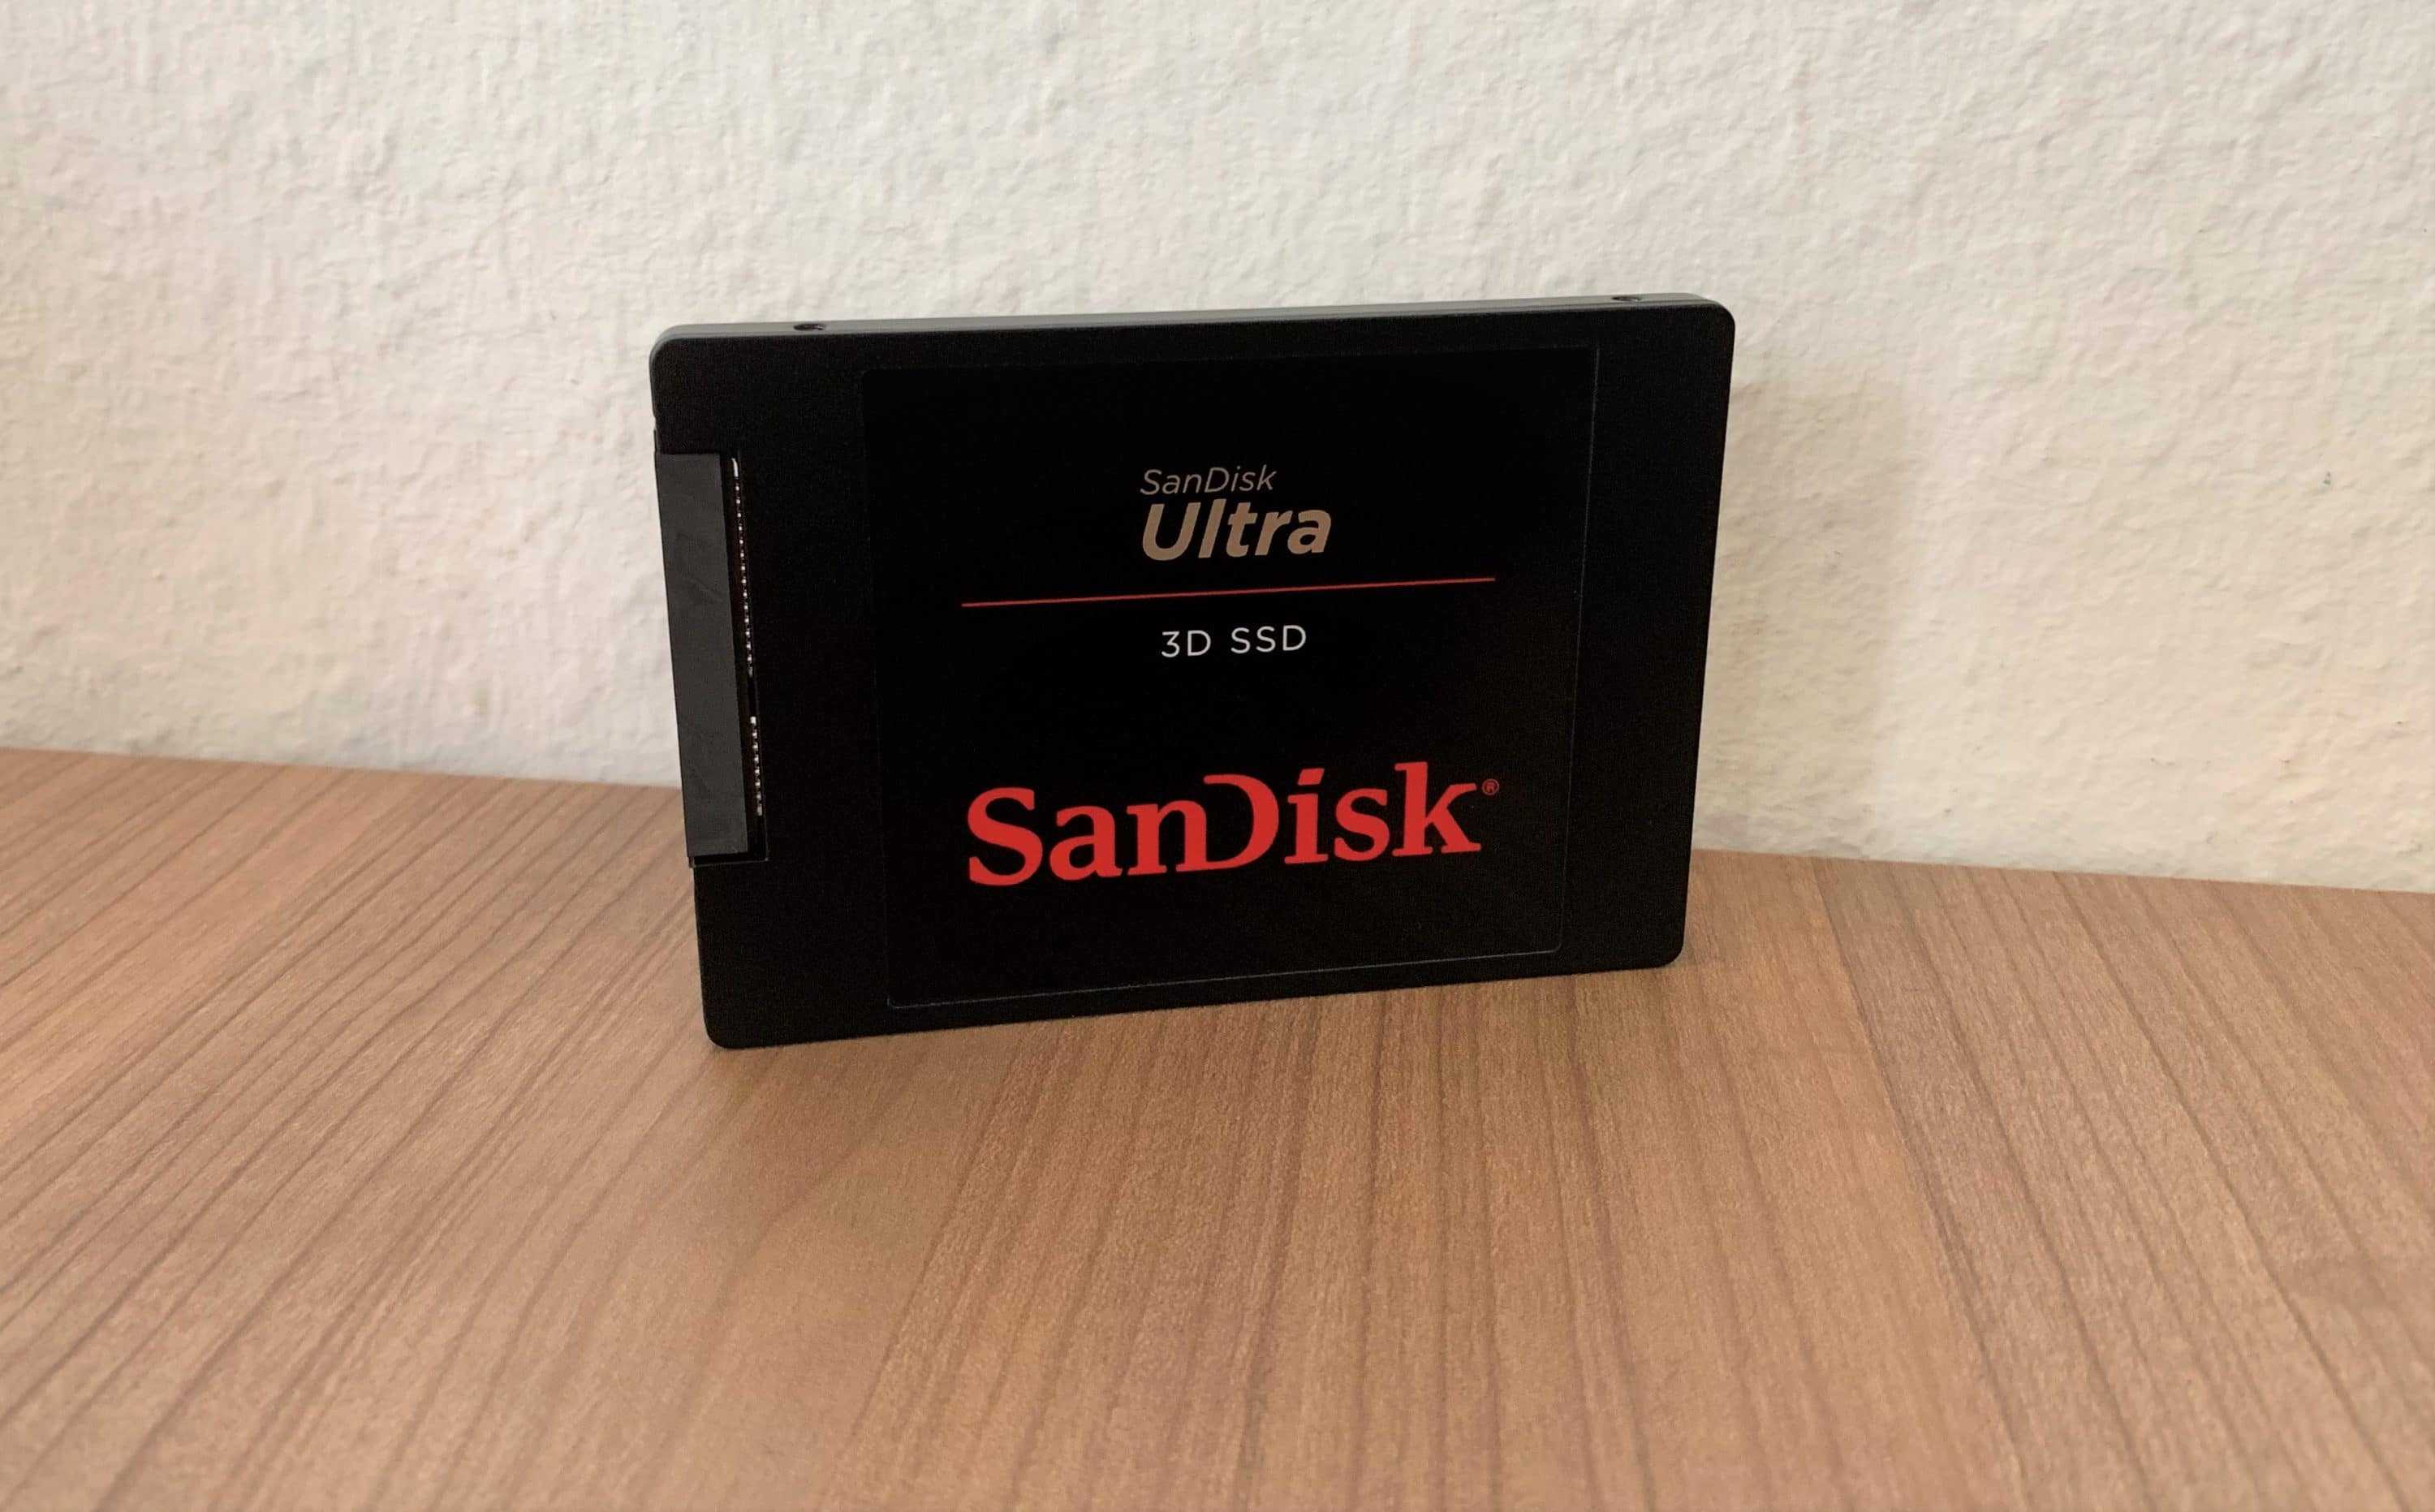 SanDisk Ultra 3D 500 GB SSD Review